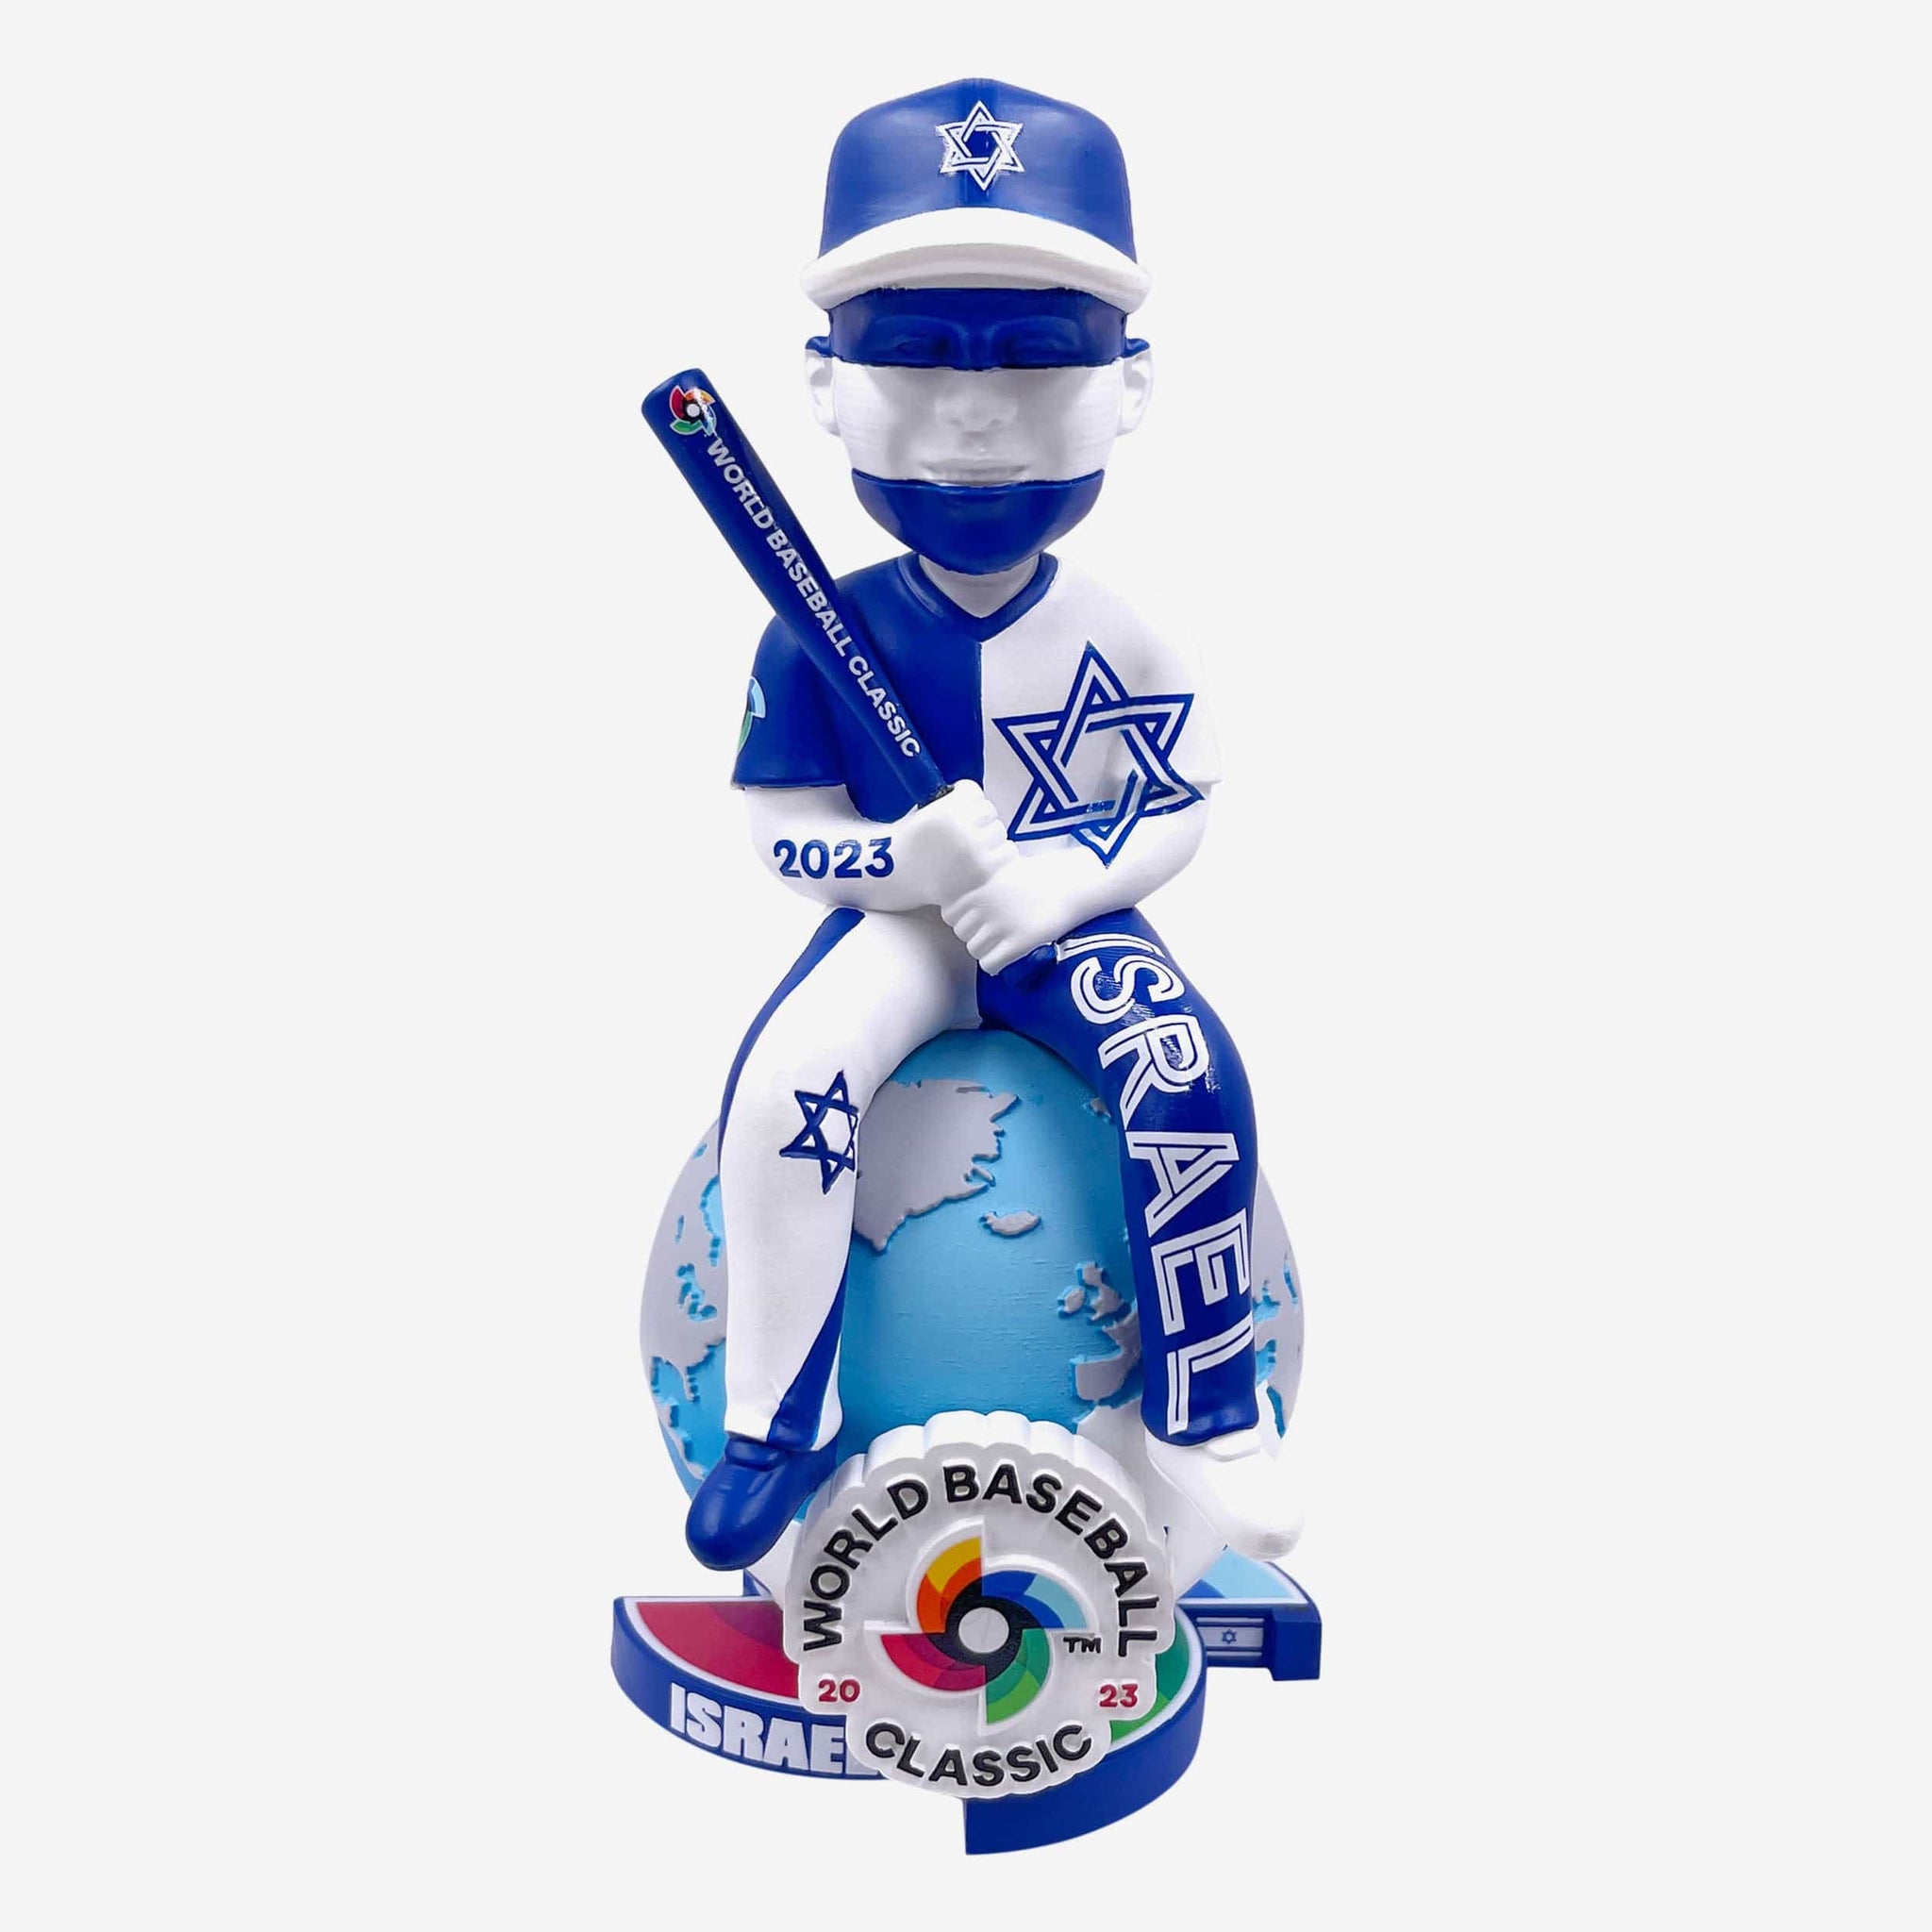 Italy 2023 World Baseball Classic Bobbles on Parade Bobblehead Officially Licensed by World Baseball Classic